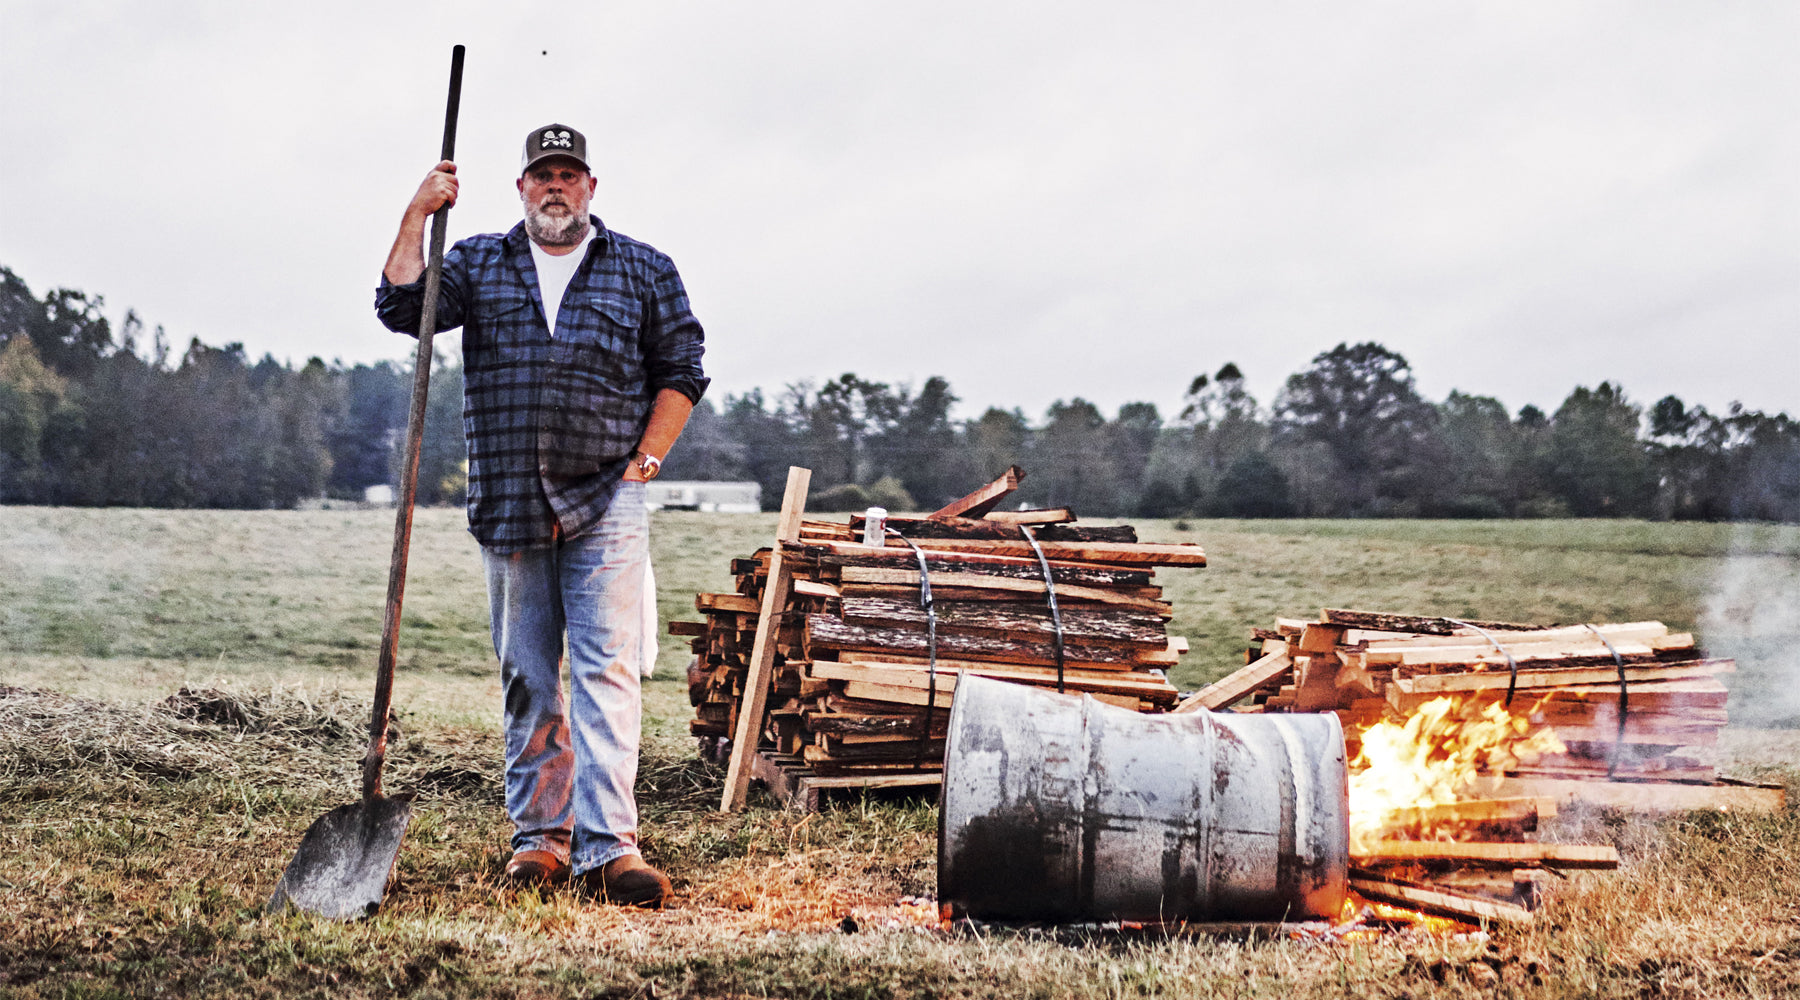 The Southern State of Barbecue